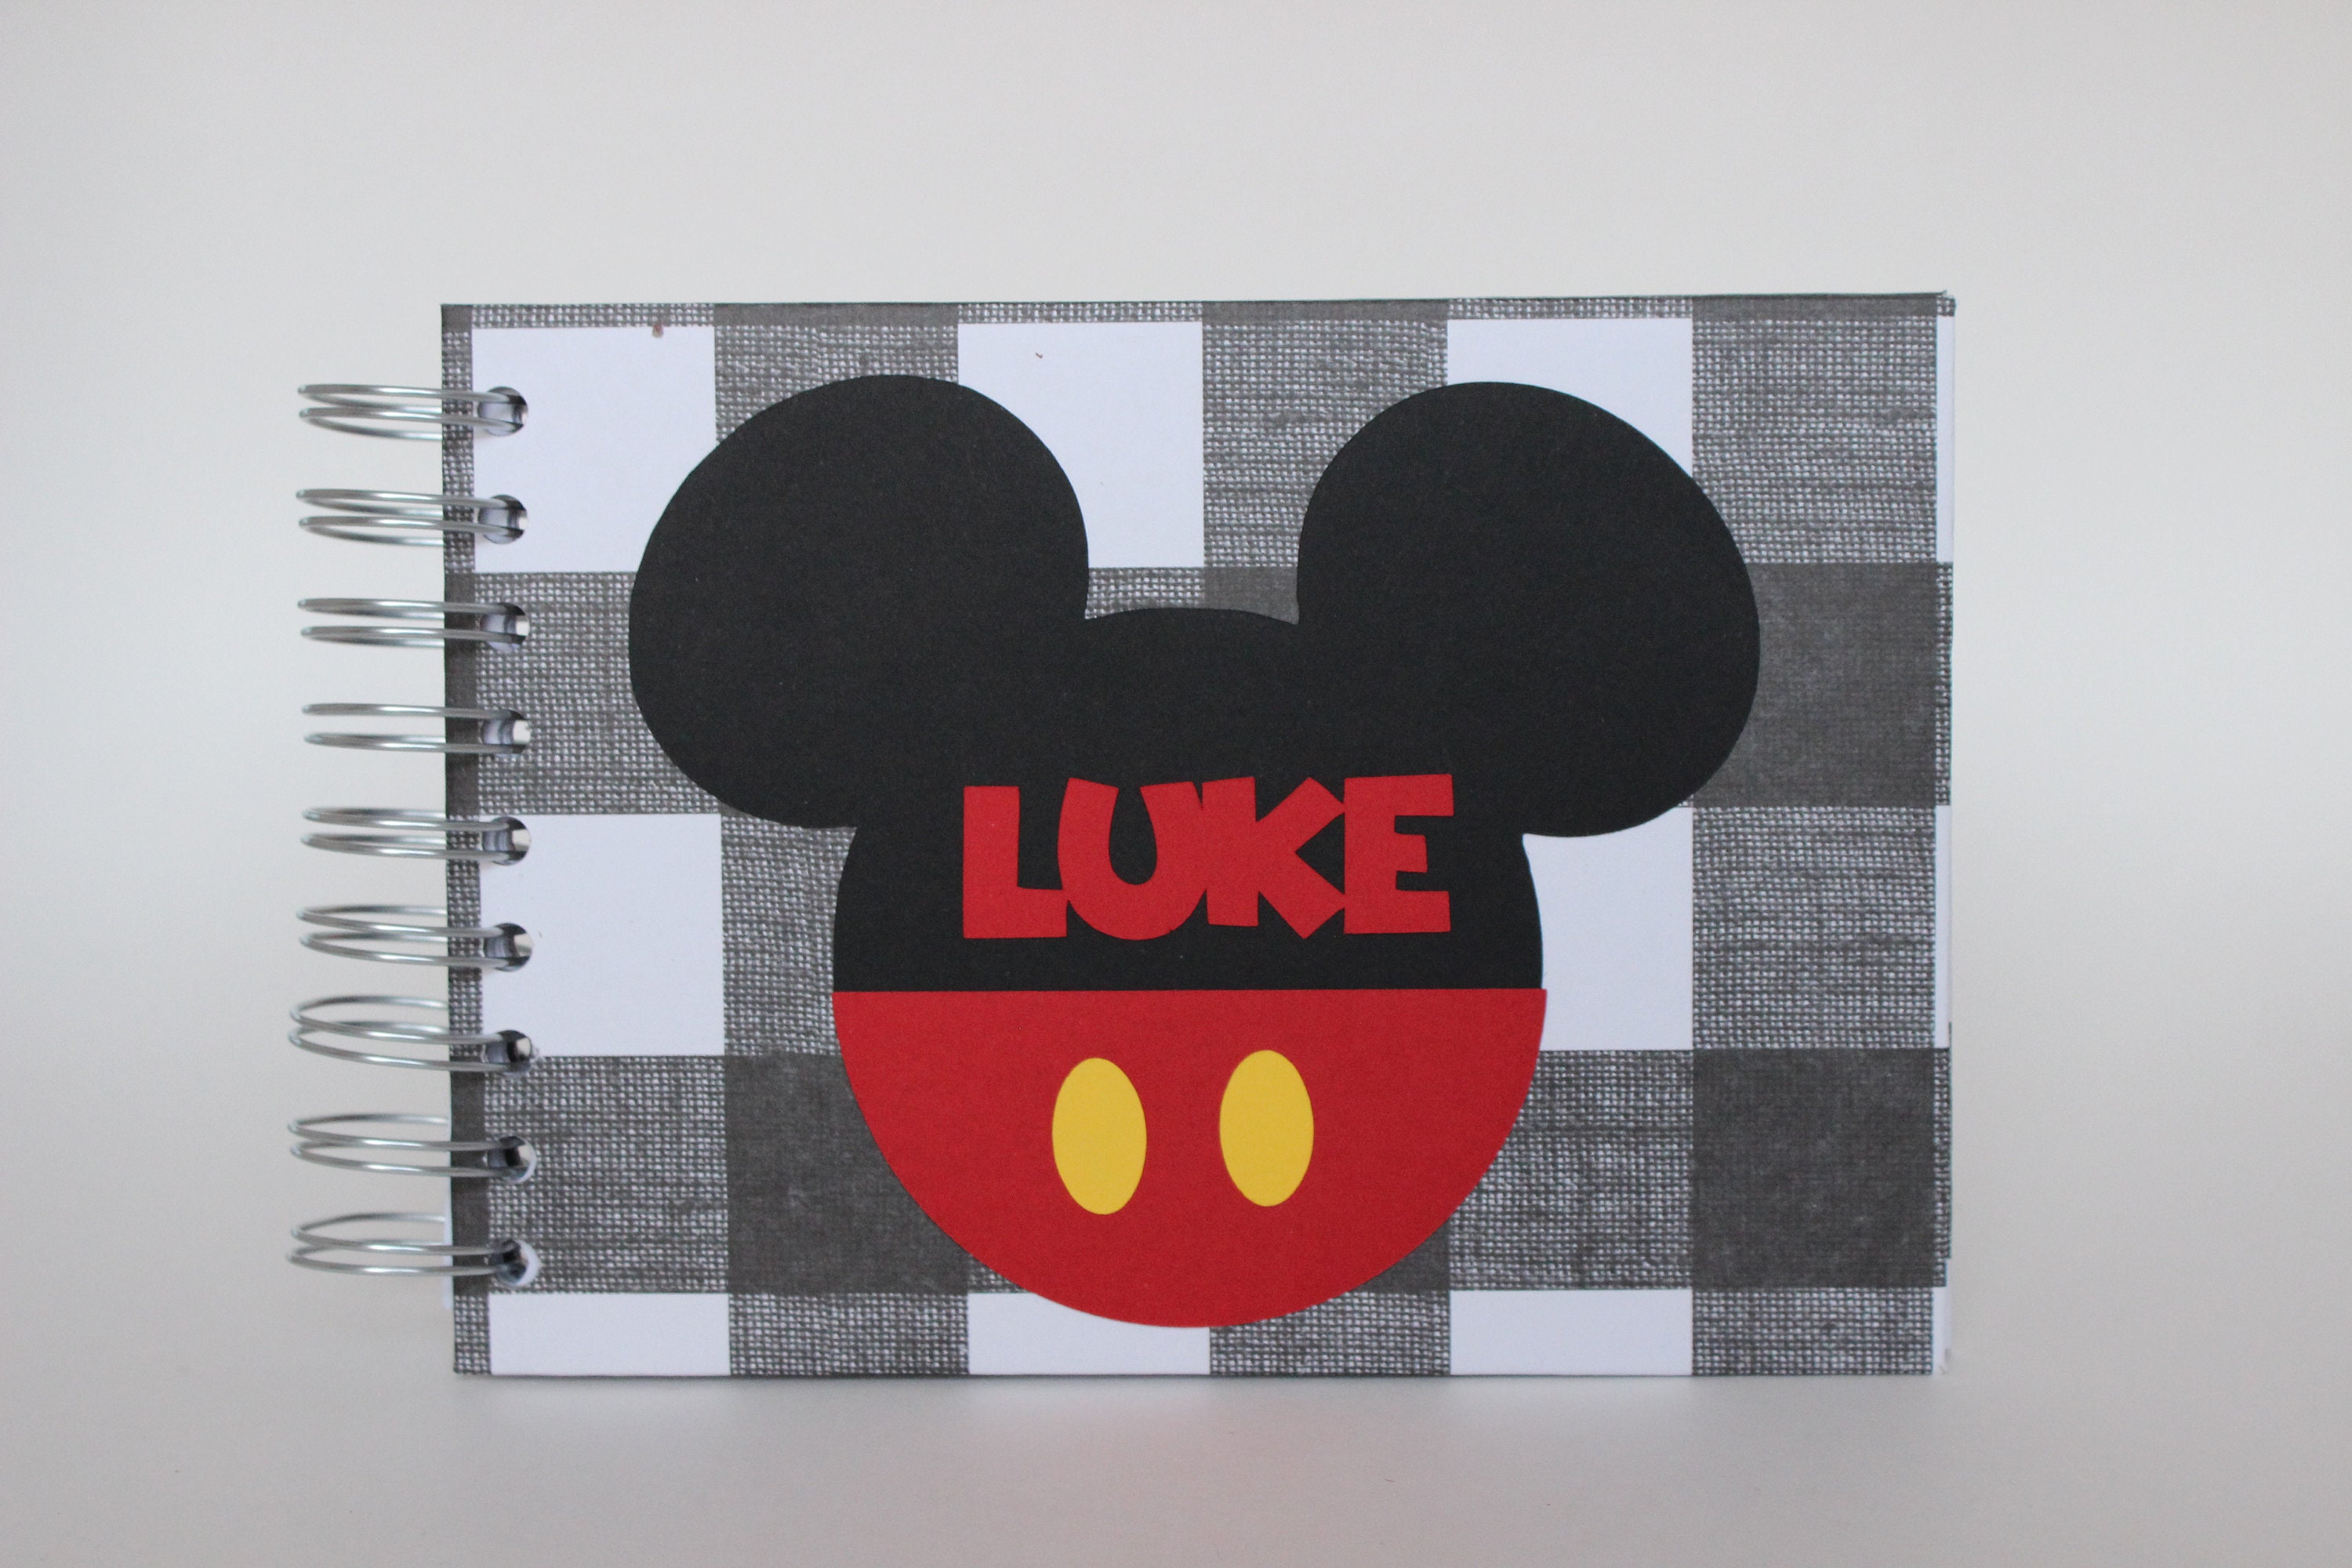 2024 Disney Autograph Book Personalized Classic Mickey Mouse